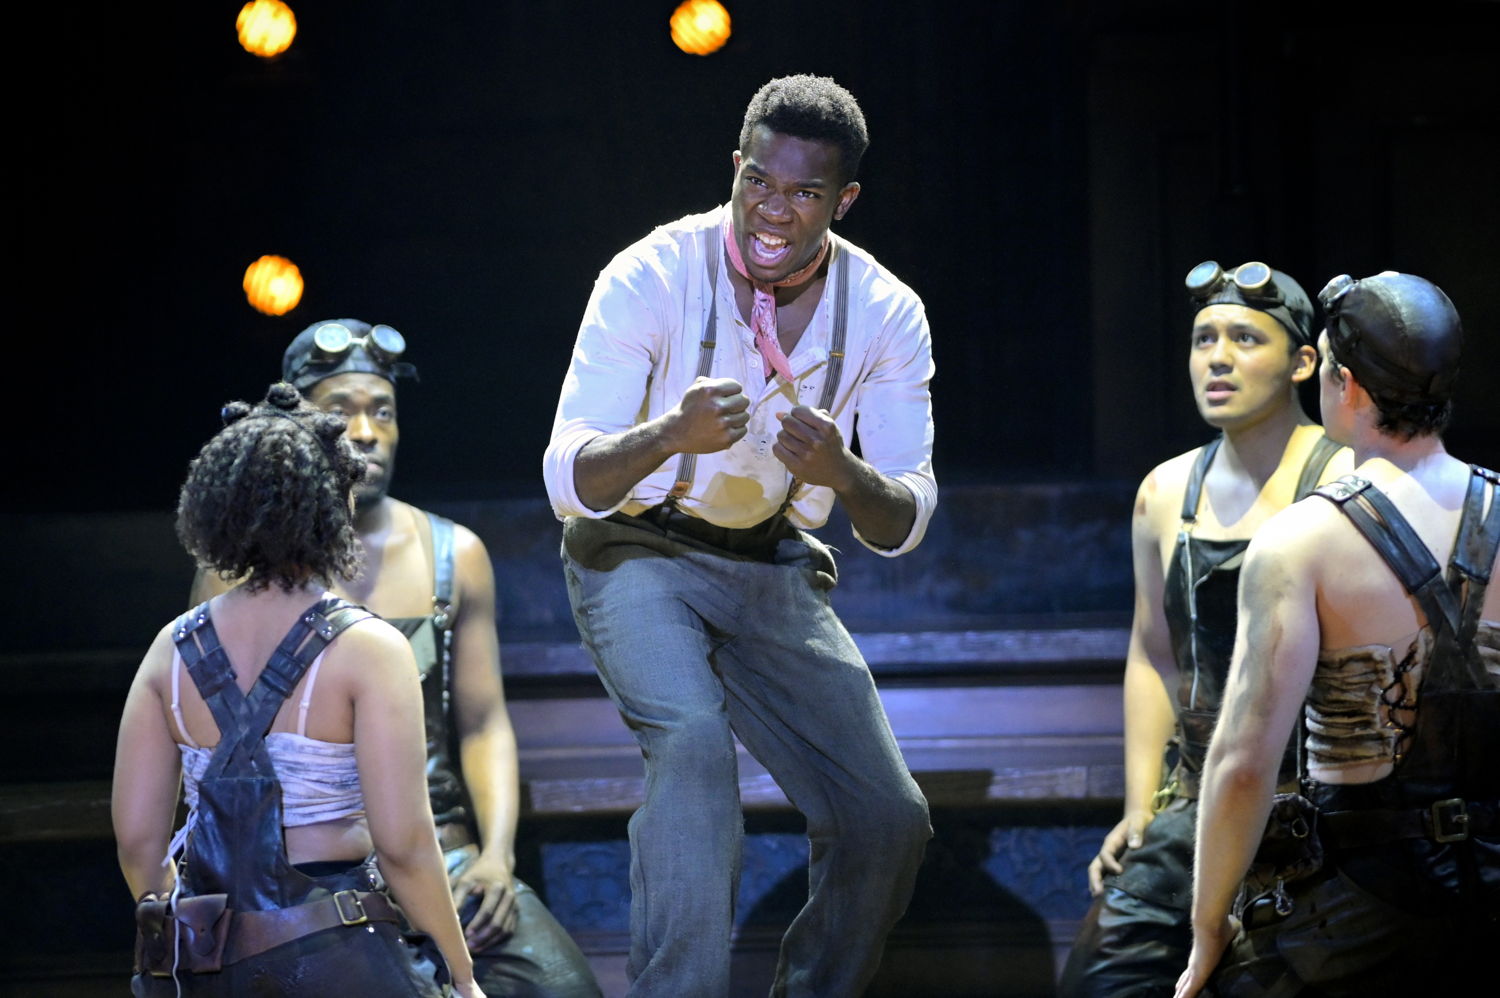 Chibueze Ihuoma and company in the Hadestown North American Tour
Photo by Kevin Berne